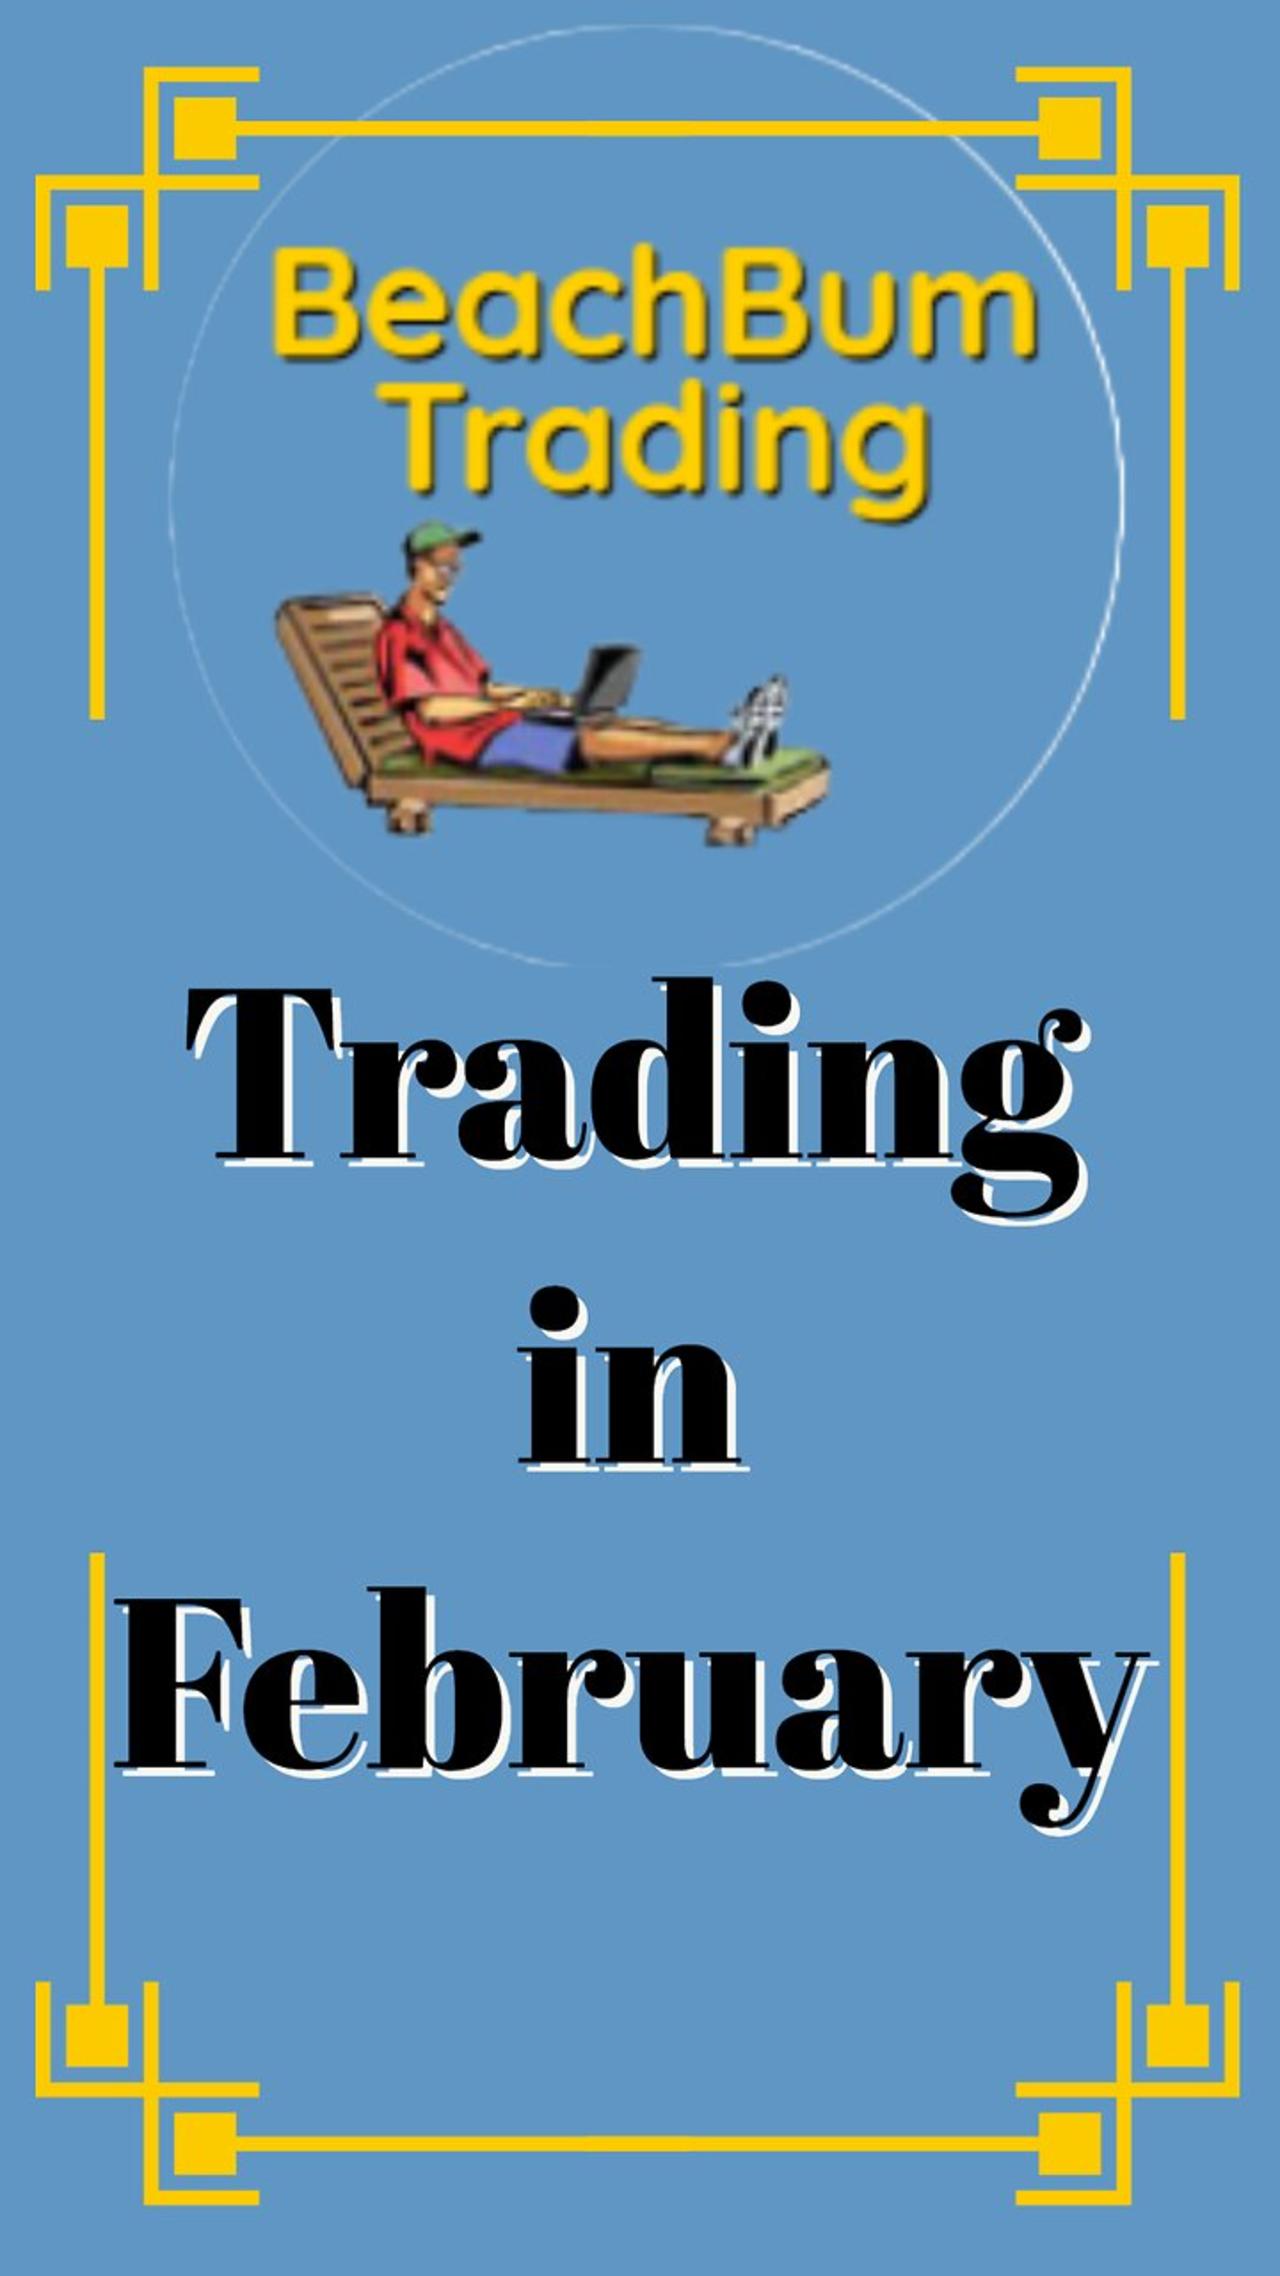 How To Make Money Trading in February | Shorts